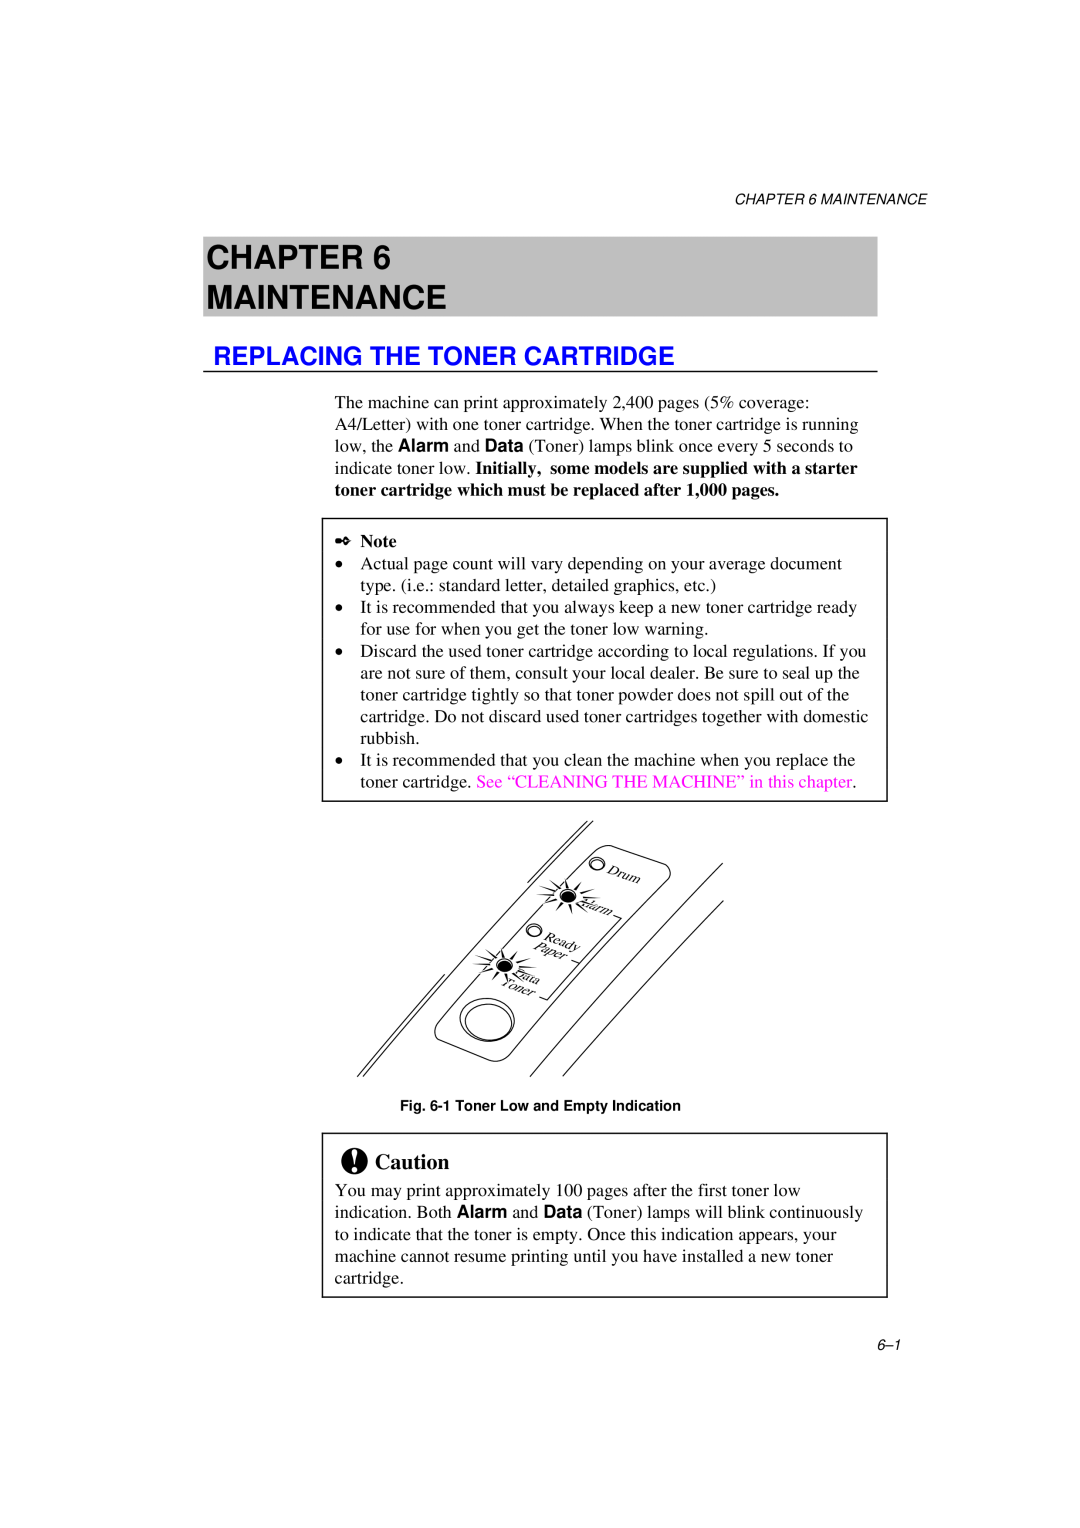 Brother MFC/HL-P2000 manual Chapter Maintenance, Replacing The Toner Cartridge 